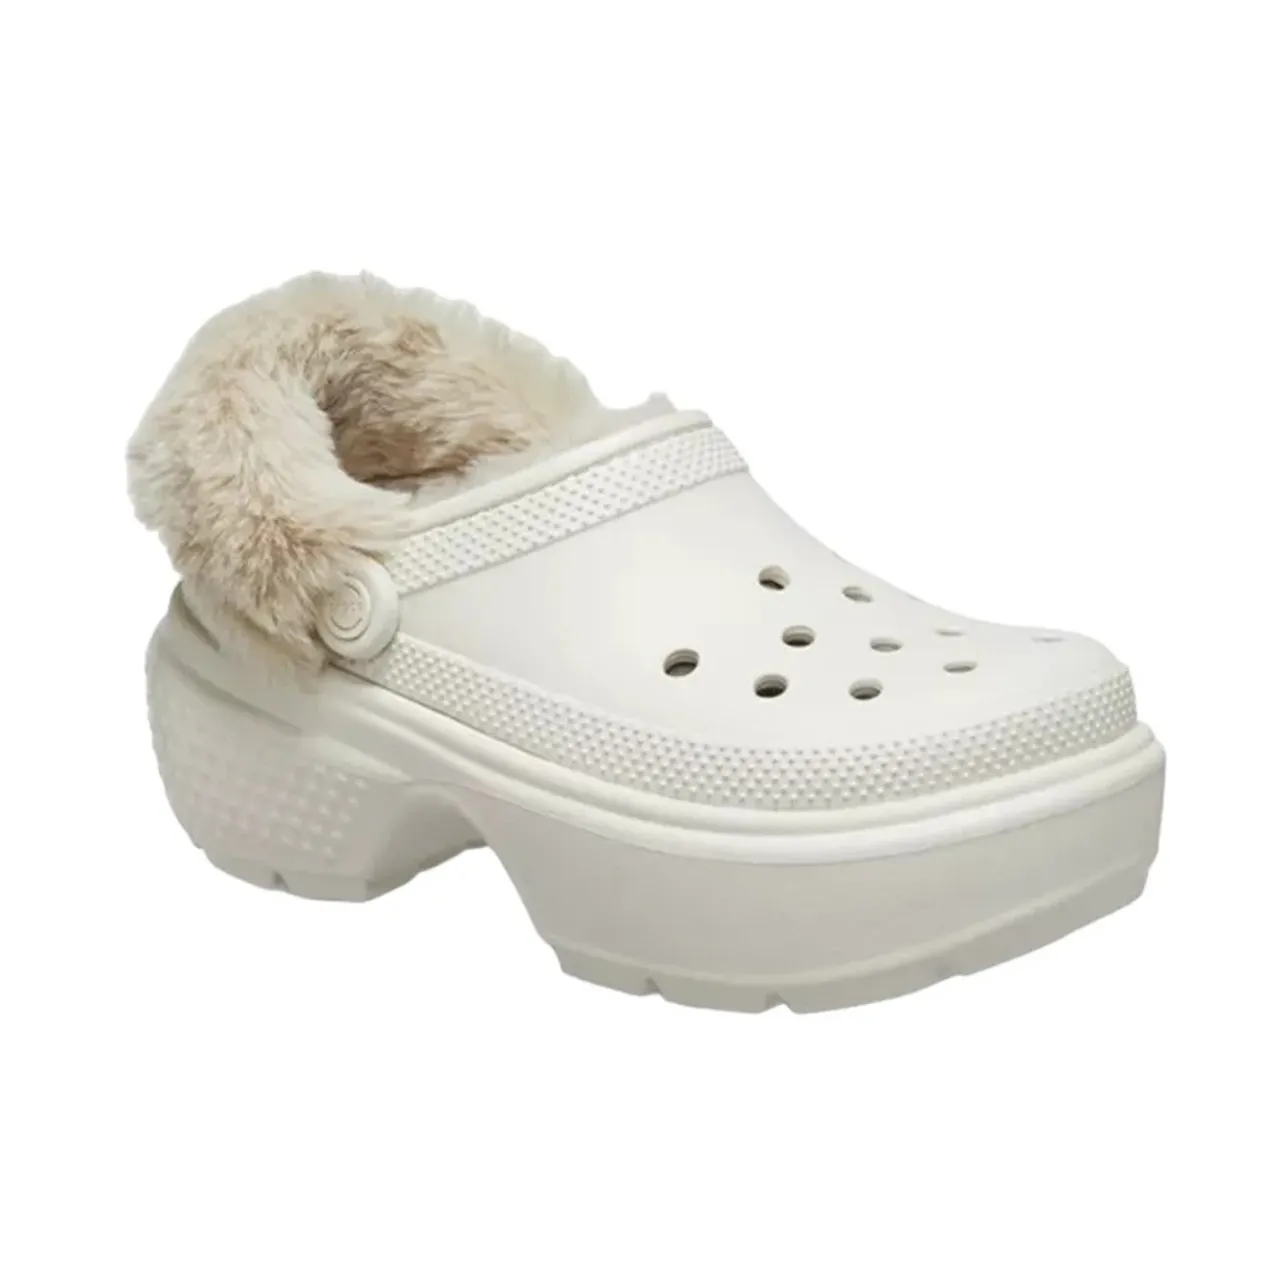 Crocs , Elegant Wedge Sandals with Exaggerated Soles ,Beige female, Sizes: